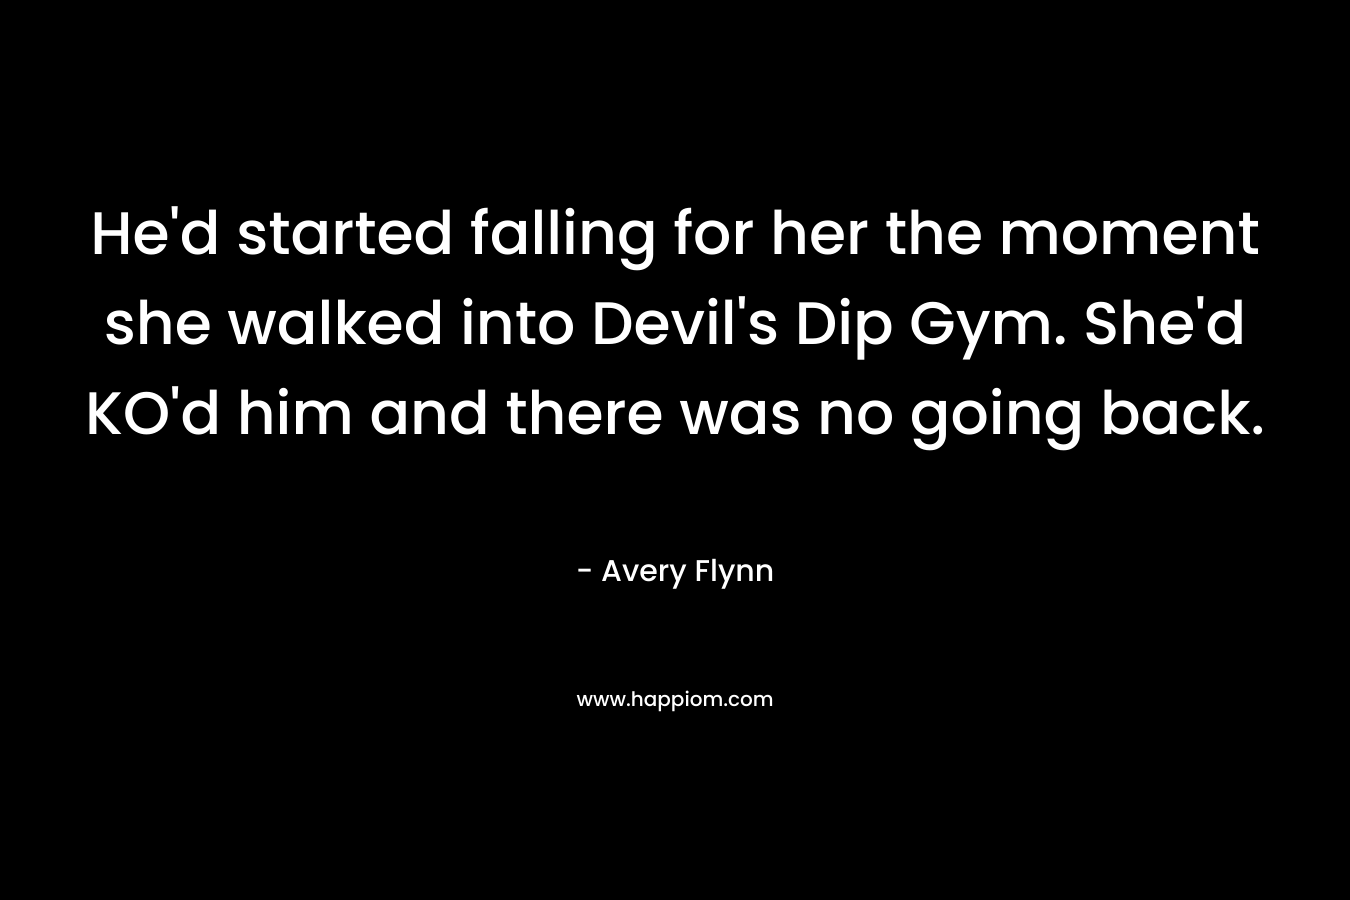 He’d started falling for her the moment she walked into Devil’s Dip Gym. She’d KO’d him and there was no going back. – Avery Flynn